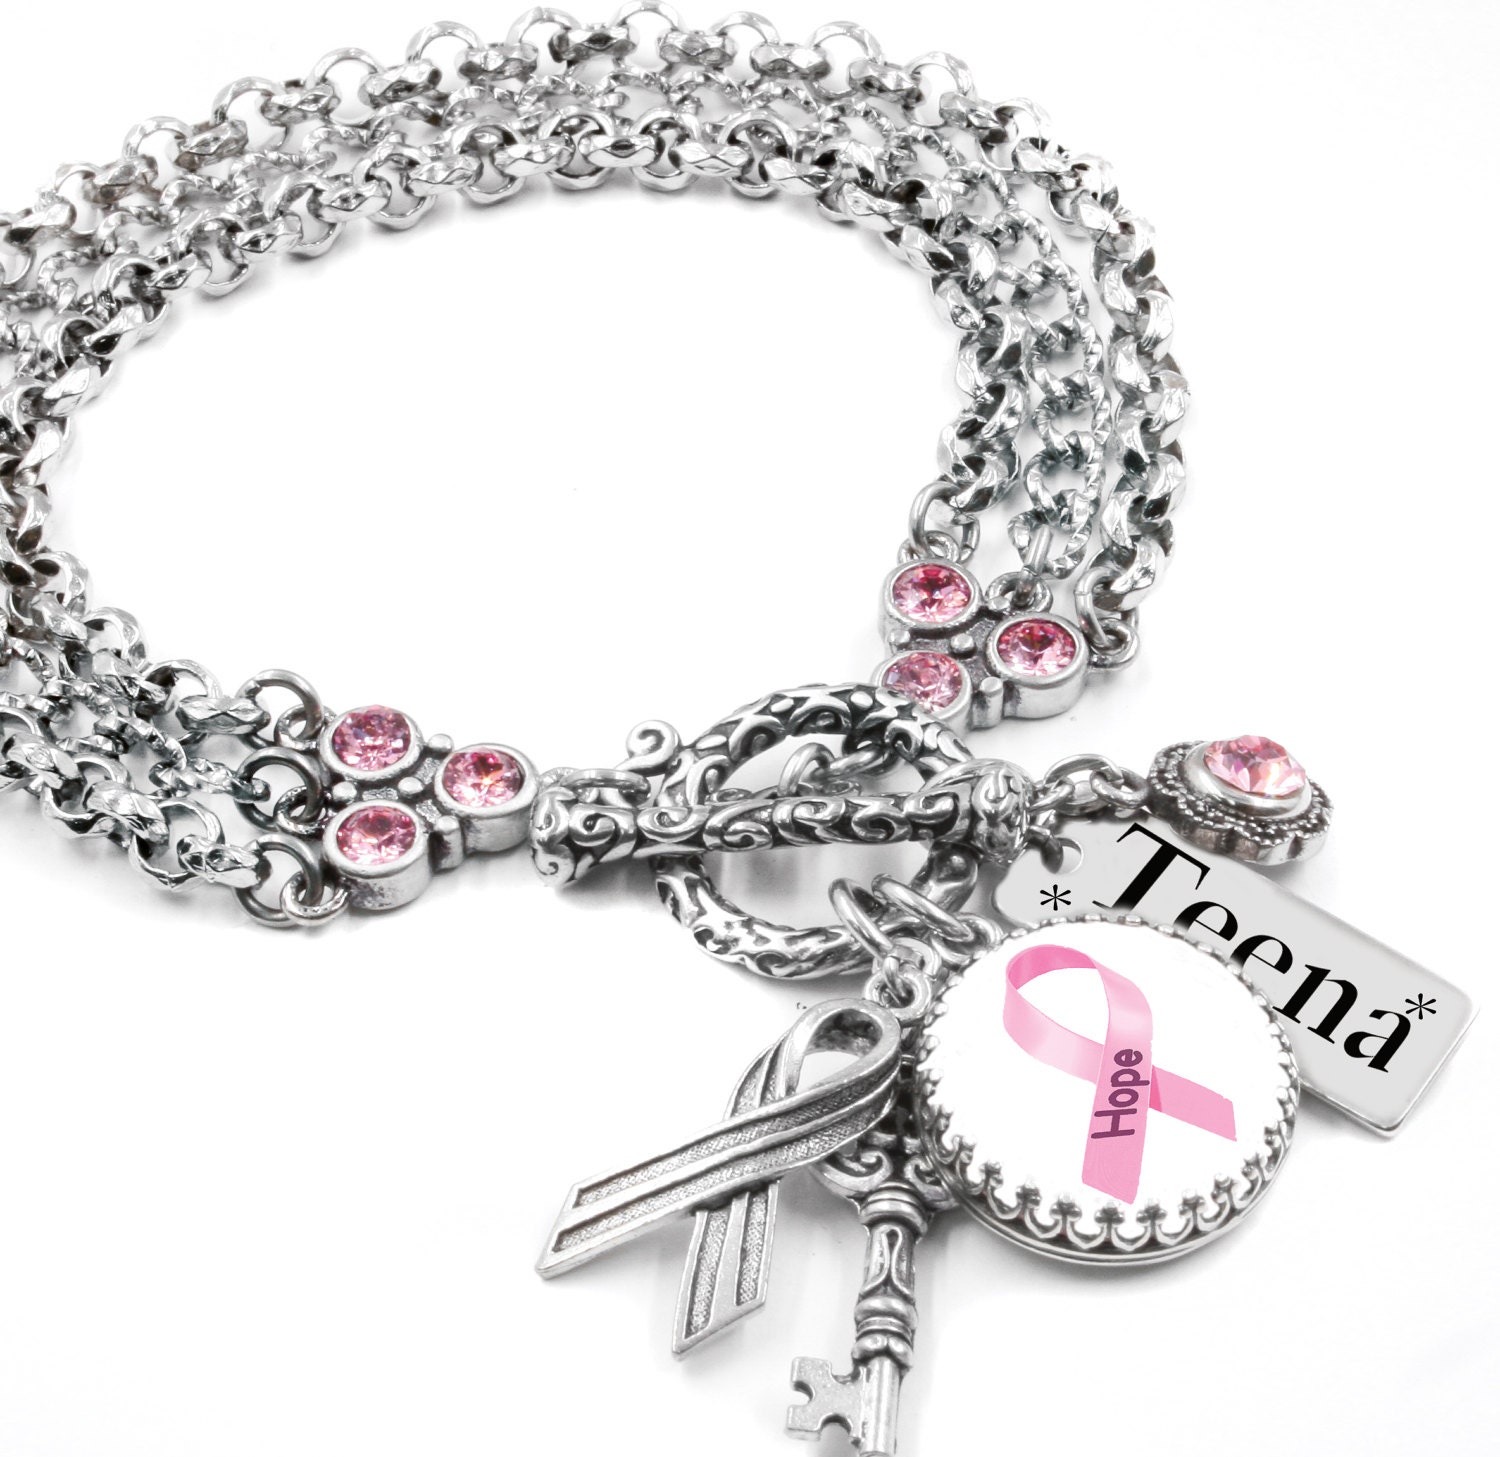 Breast Cancer Charm Bracelet Breast Cancer Jewelry Awareness